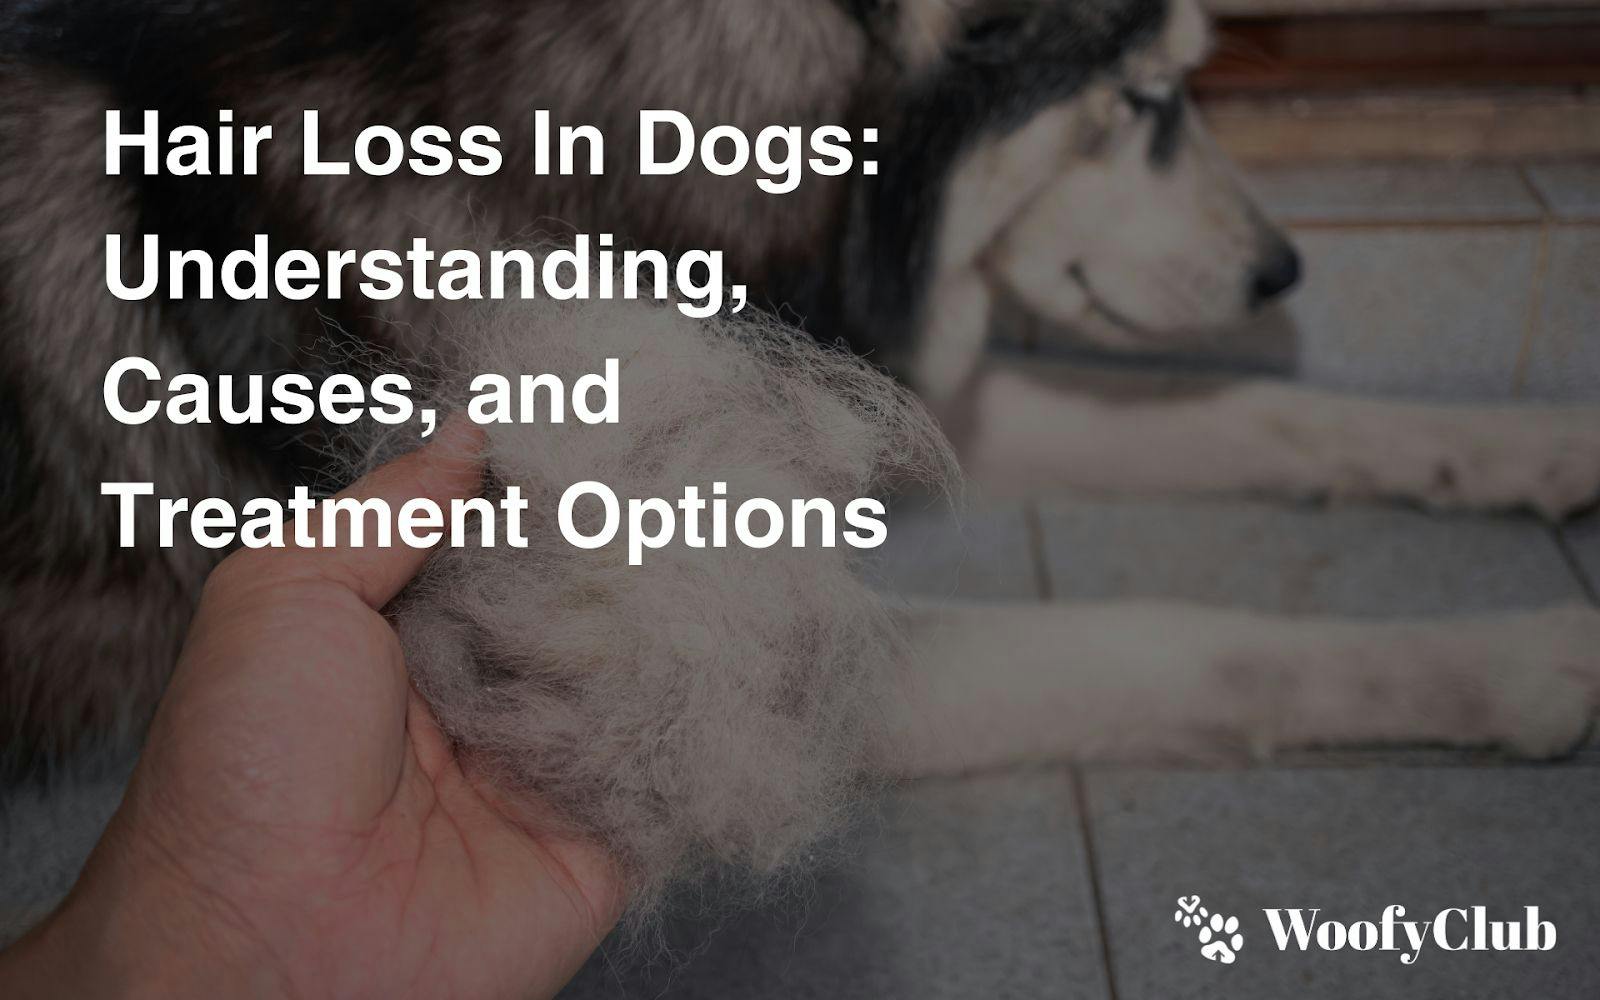 Hair Loss In Dogs: Understanding, Causes, And Treatment Options